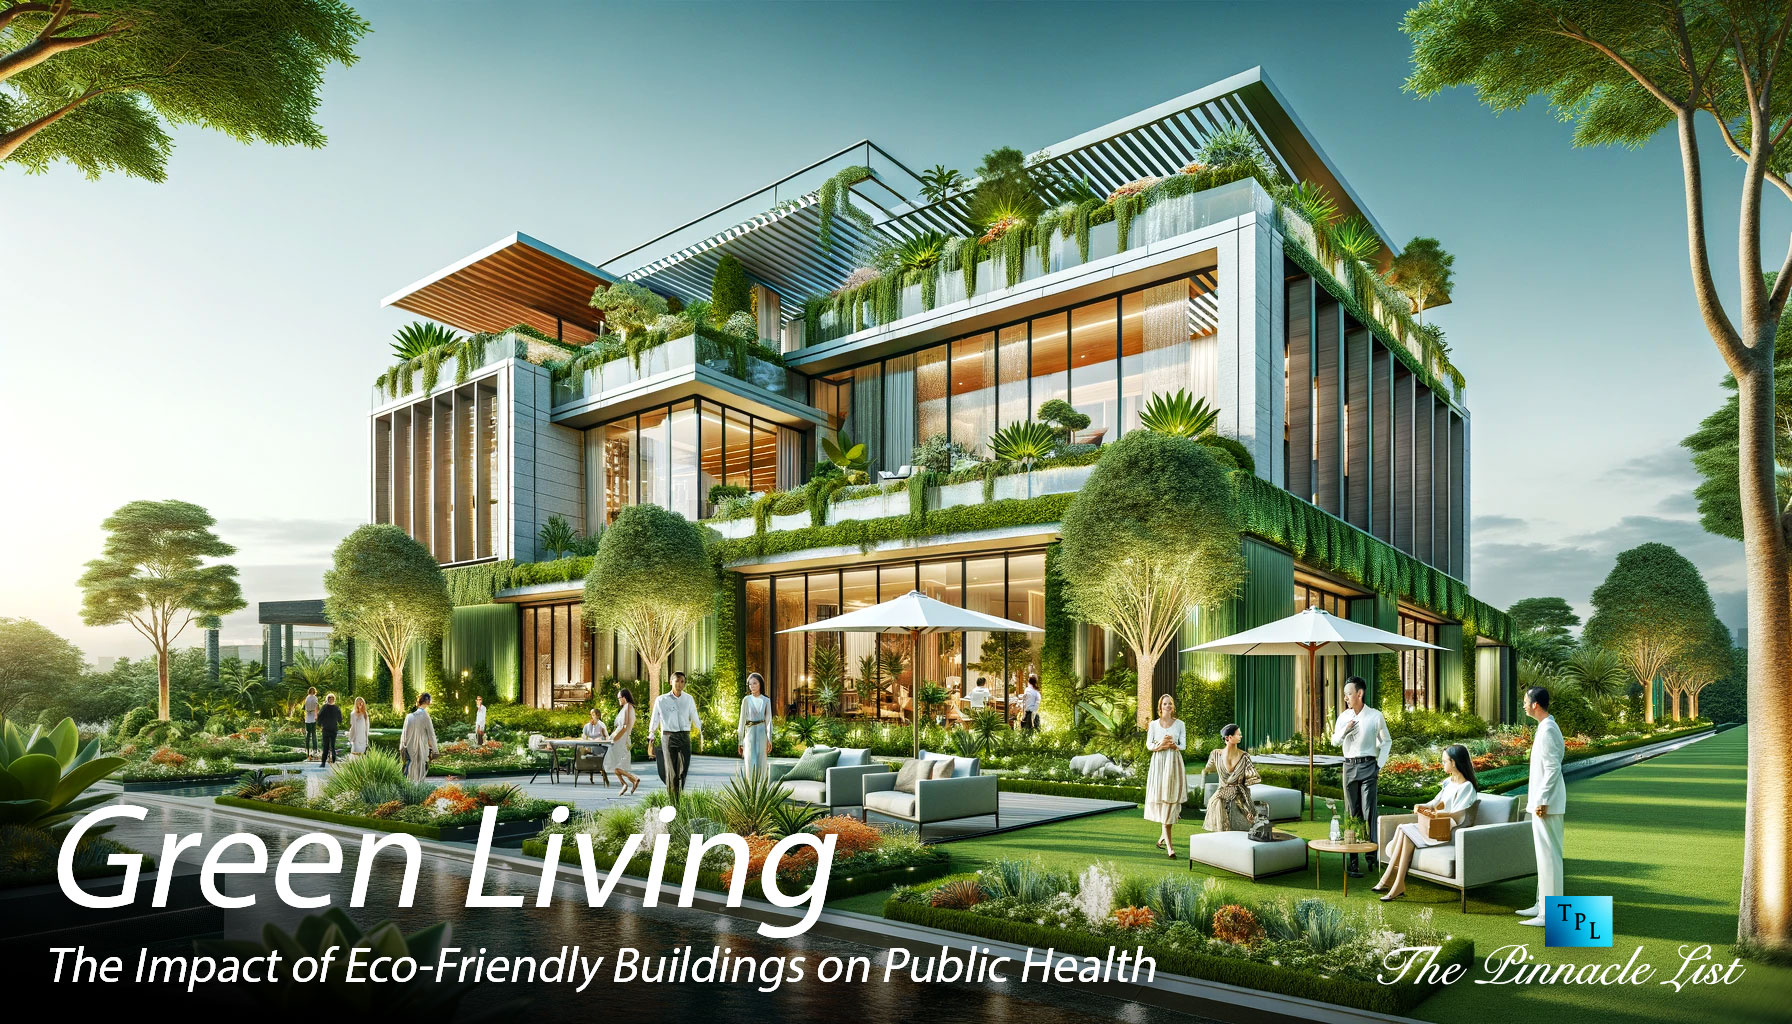 Green Living: The Impact of Eco-Friendly Buildings on Public Health